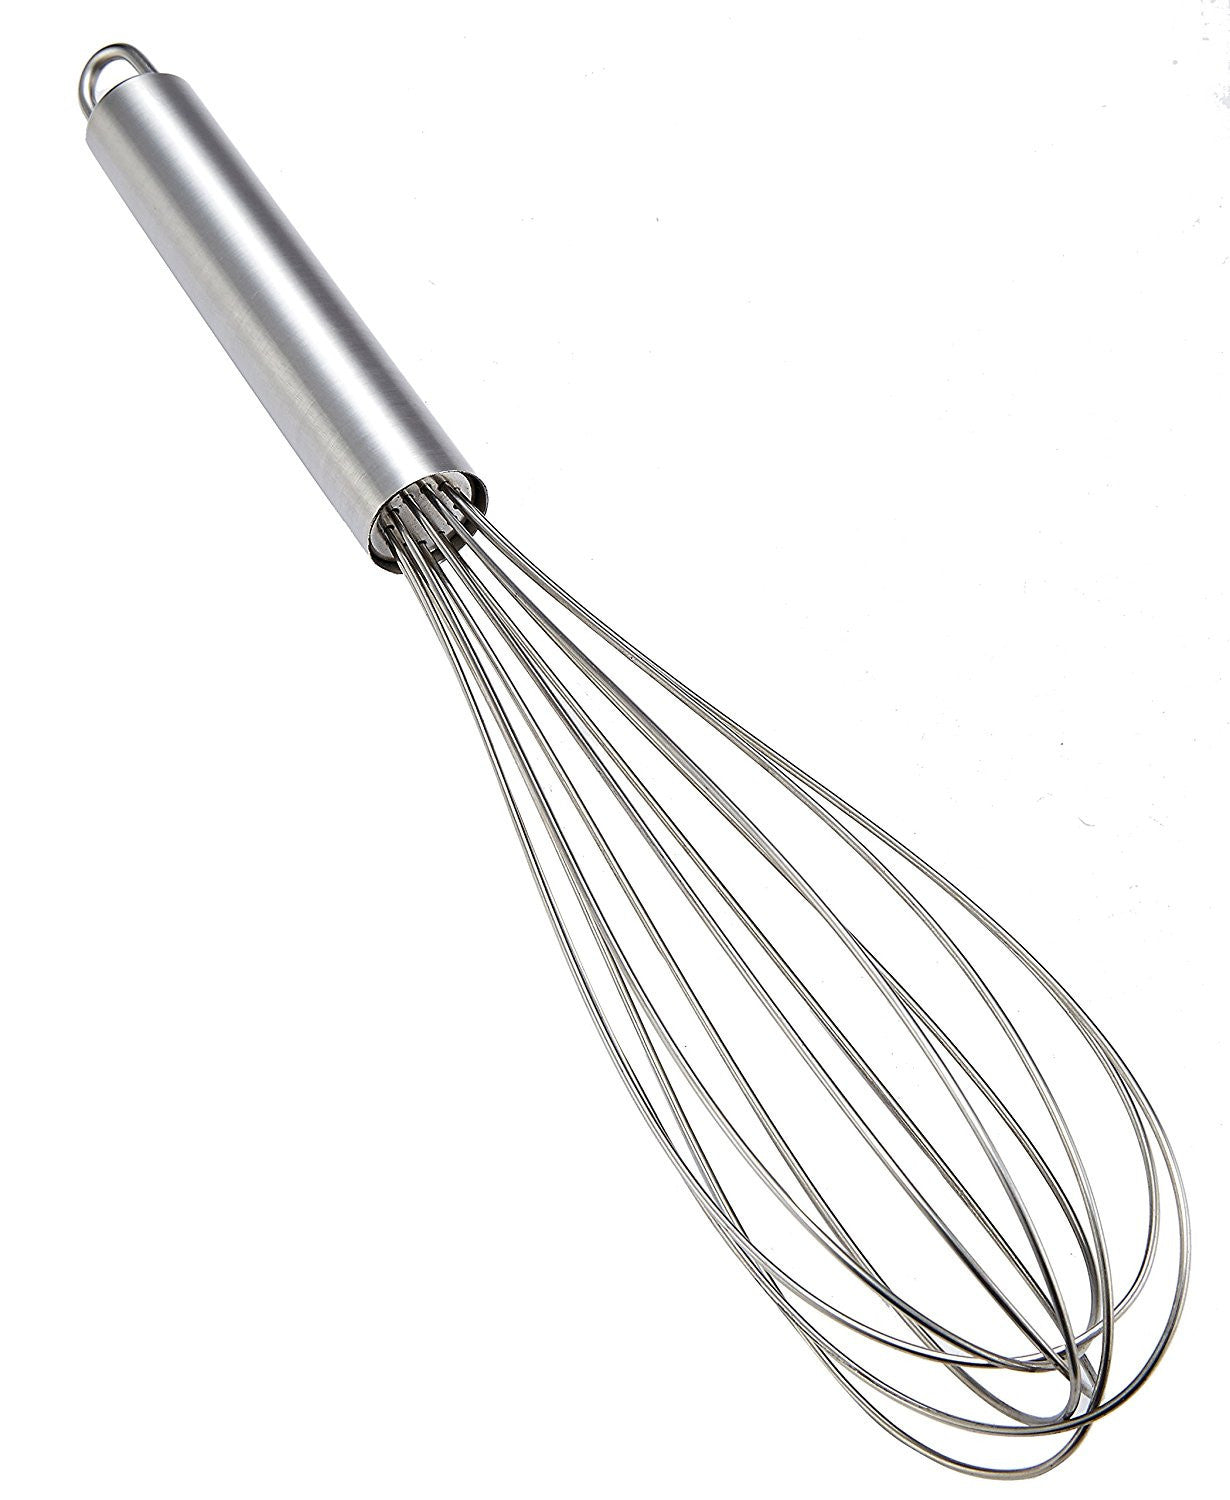 When To Use The Whisk And When To Use The Beater